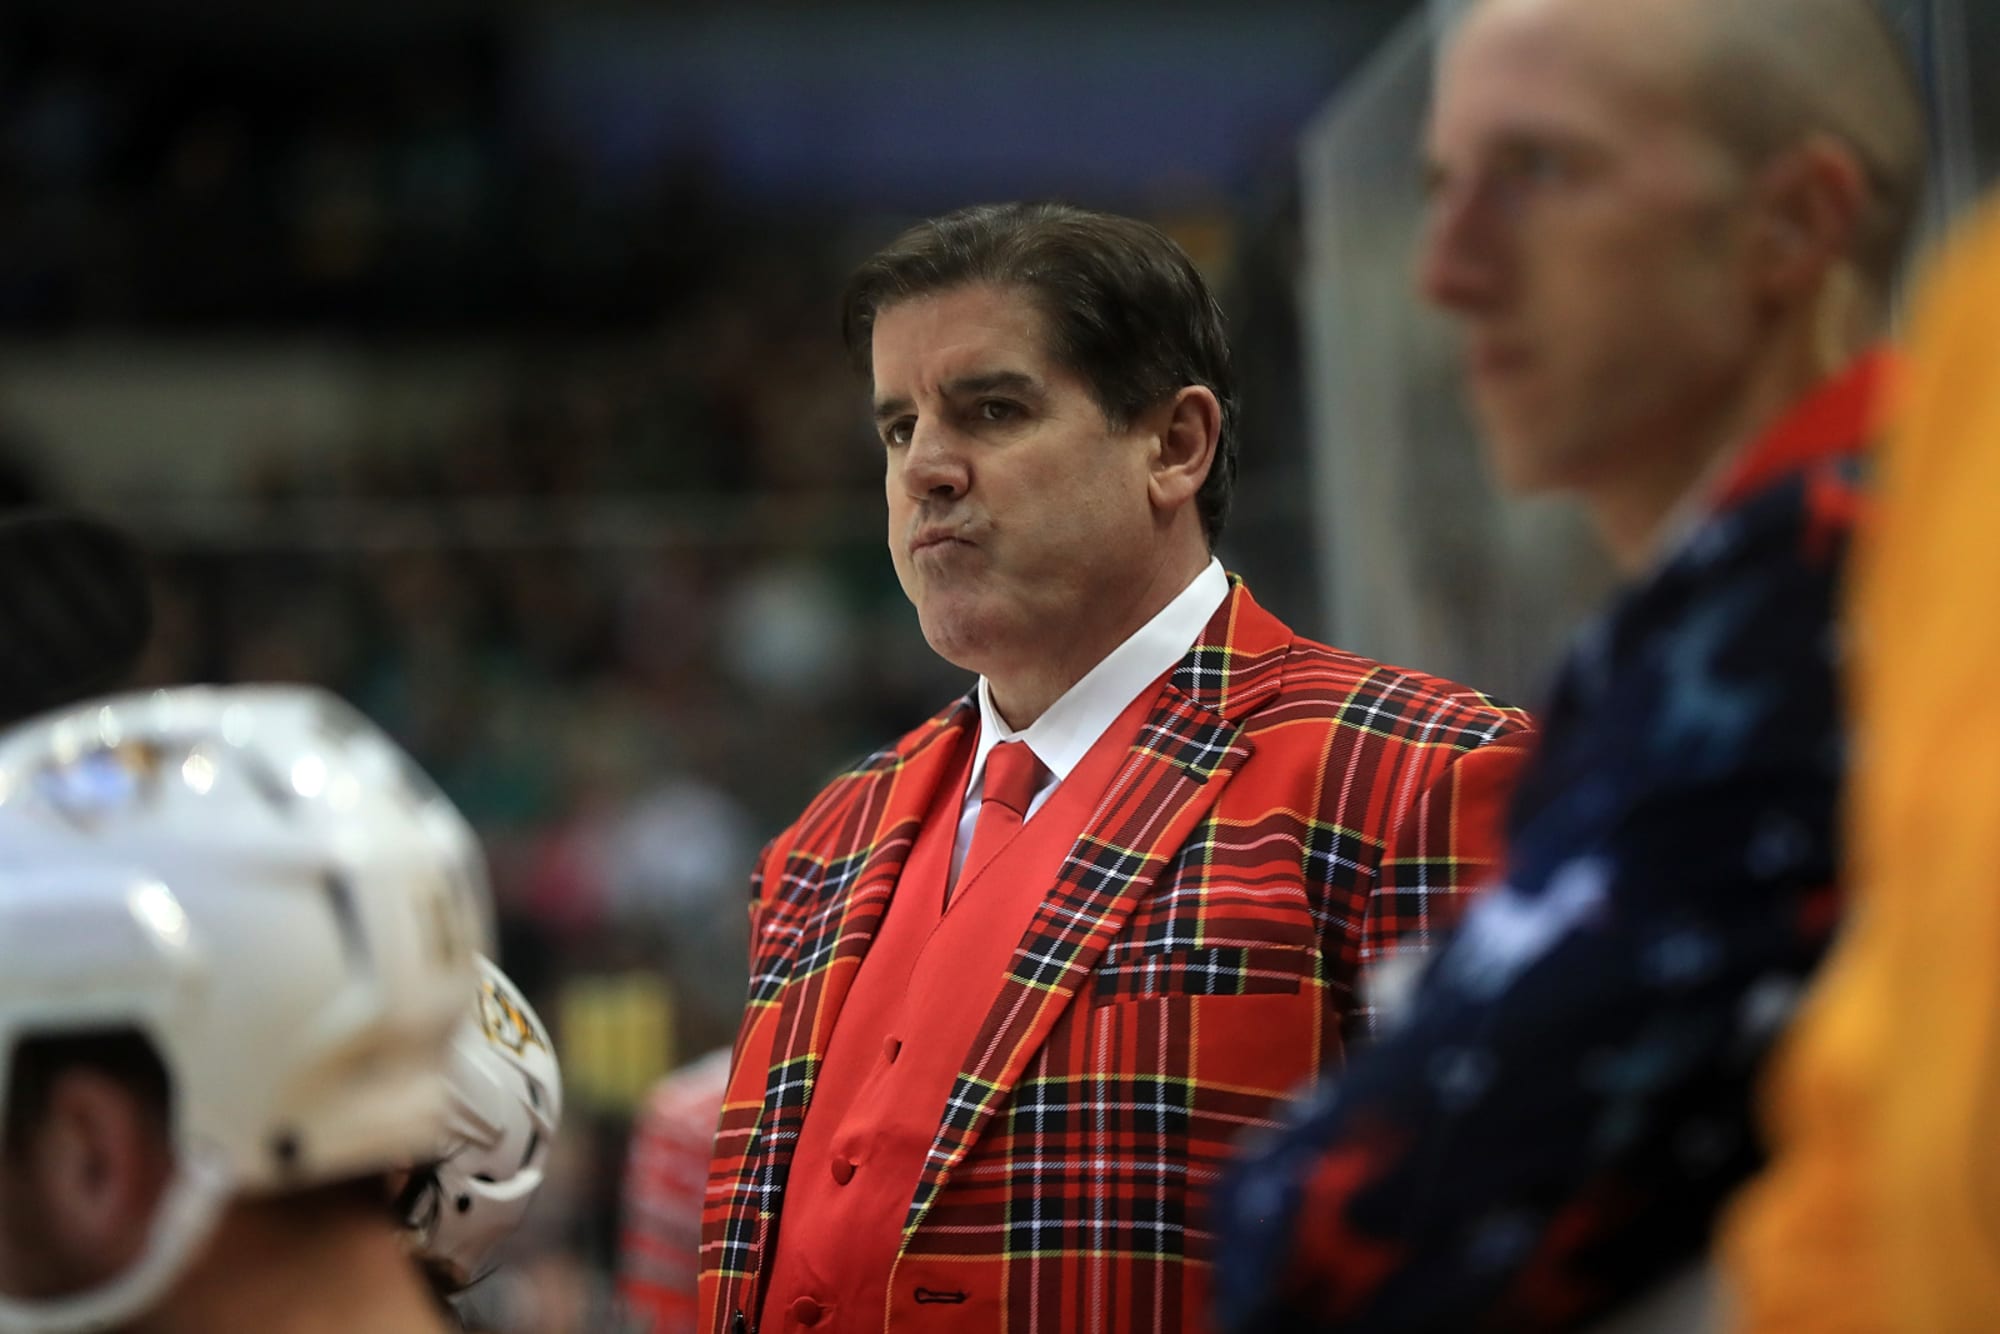 Washington Capitals Peter Laviolette is the right choice for head coach